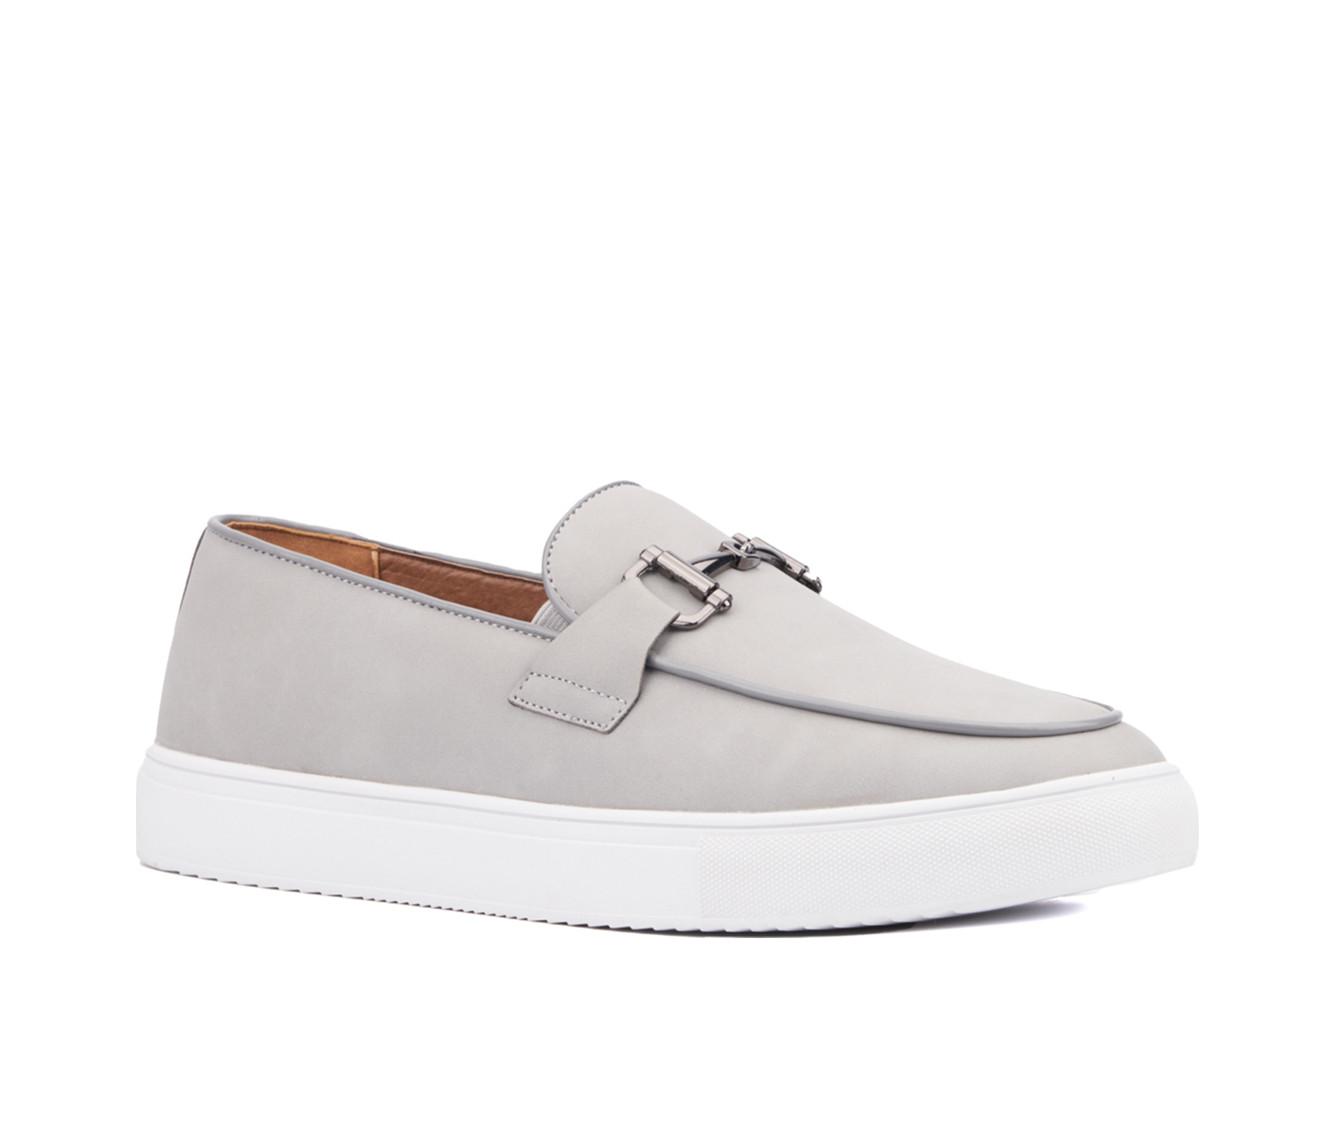 Men's Xray Footwear Quantum Casual Loafers